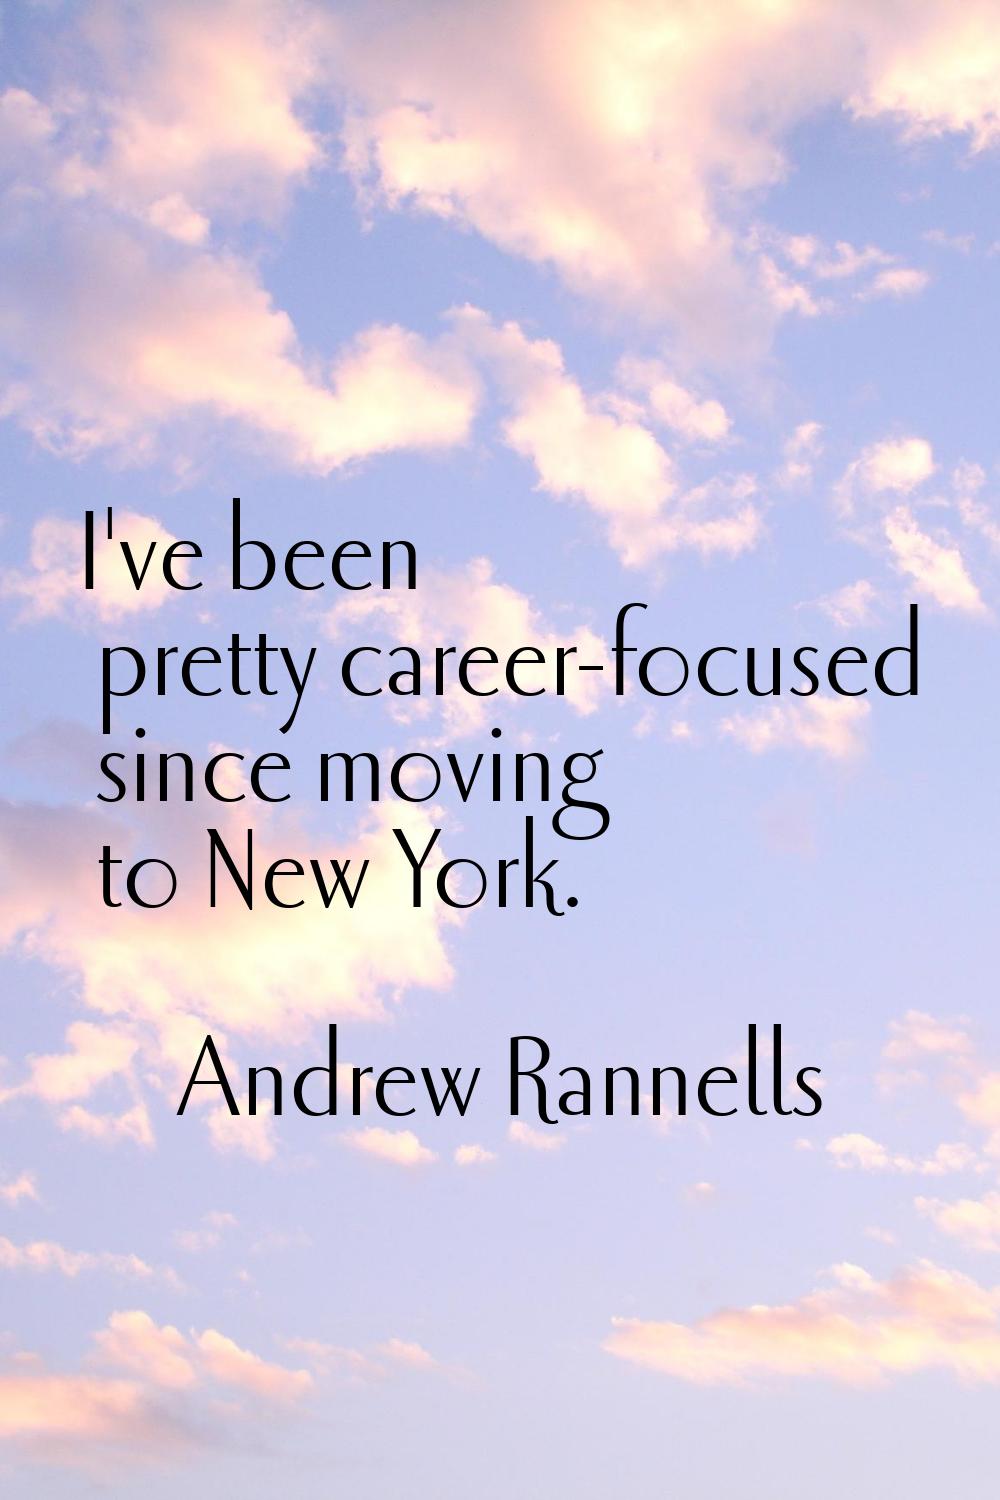 I've been pretty career-focused since moving to New York.